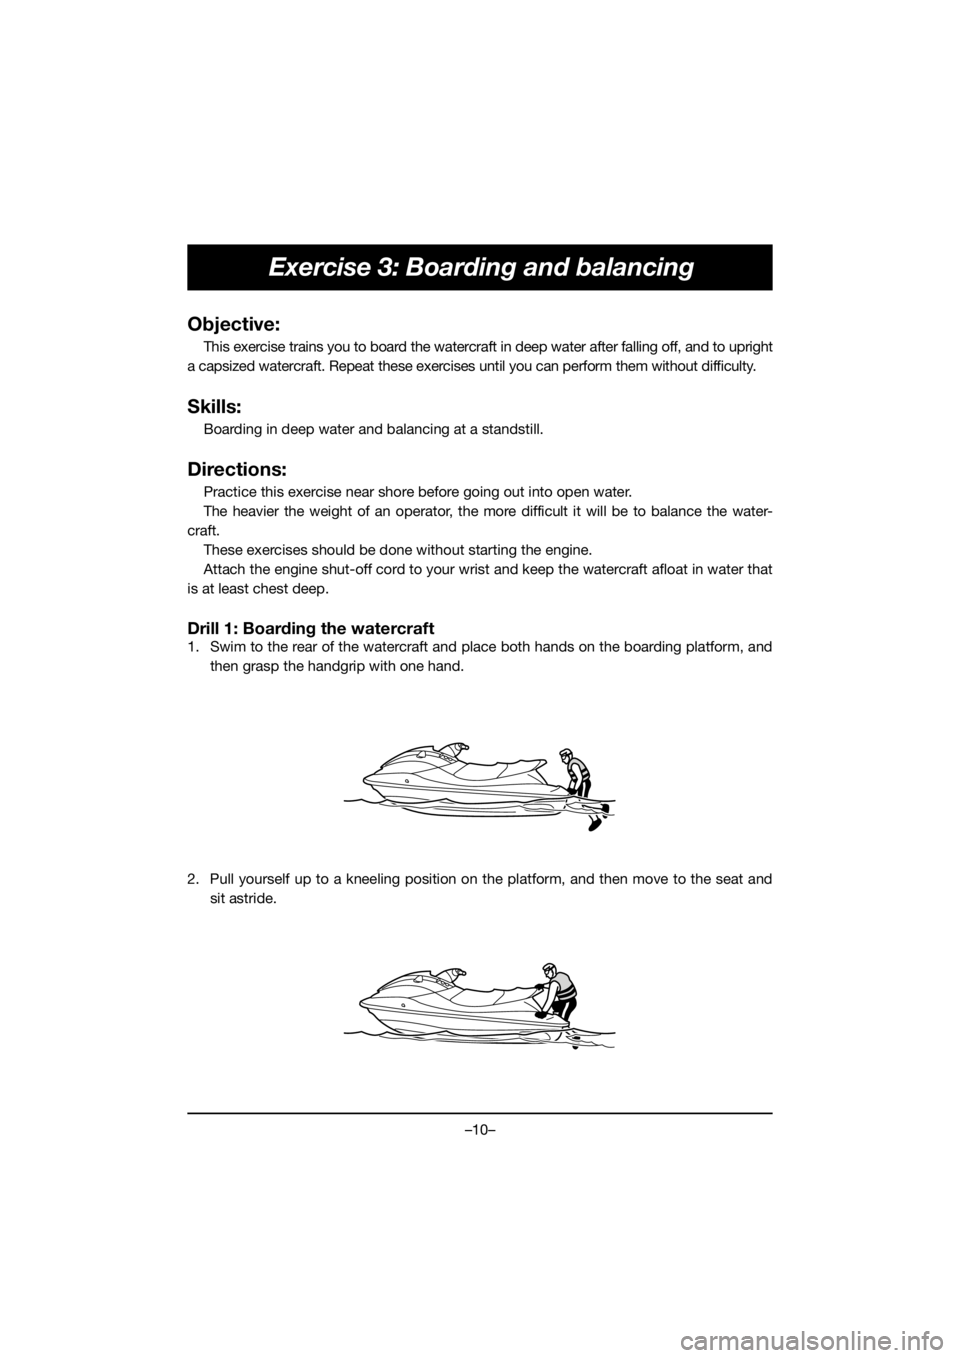 YAMAHA EX 2019  Betriebsanleitungen (in German) –10–
Exercise 3: Boarding and balancing
Objective:
This exercise trains you to board the watercraft in deep water after falling off, and to upright
a capsized watercraft. Repeat these exercises un